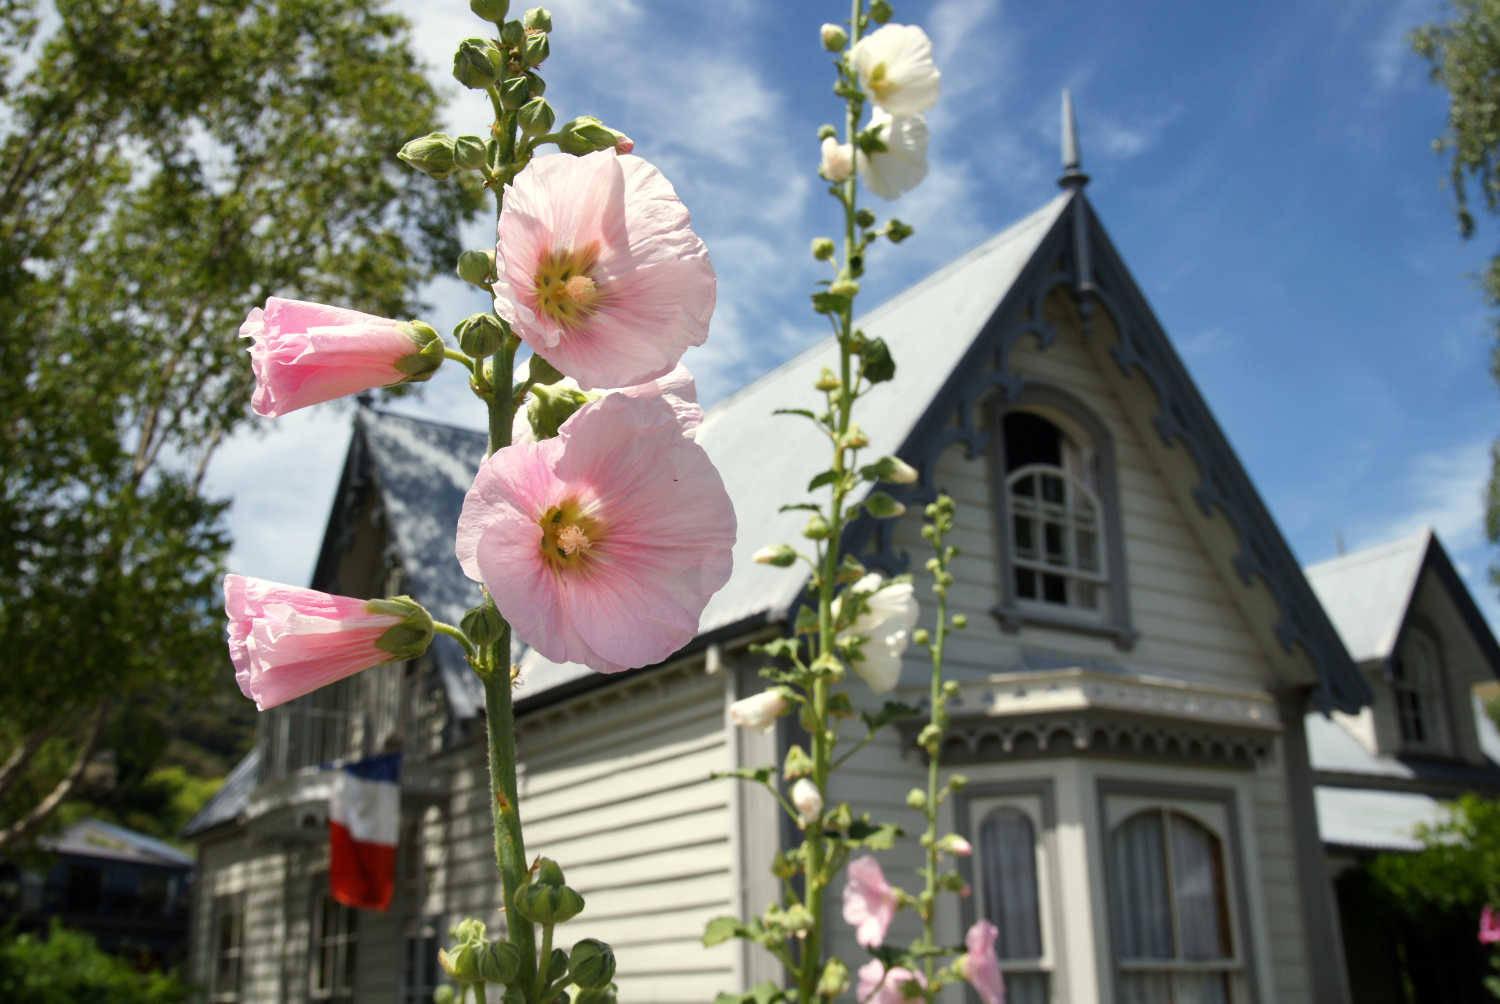 Hollyhock in front of a colonial house, French style colonial homes, Christchurch, New Zealand